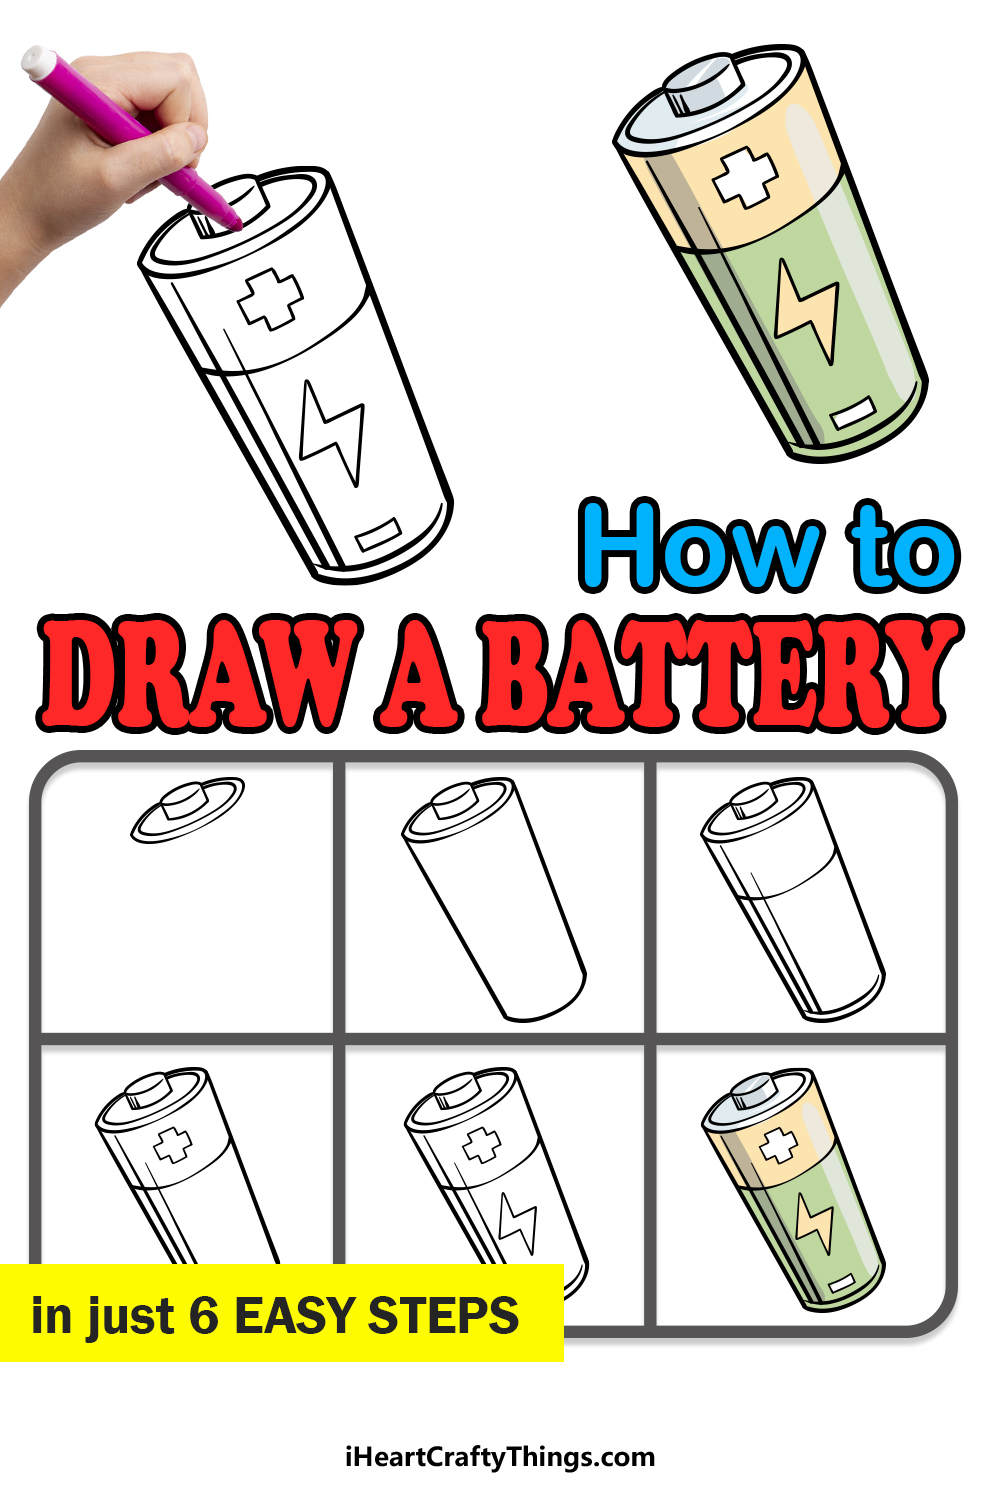 how to draw a battery in 6 easy steps